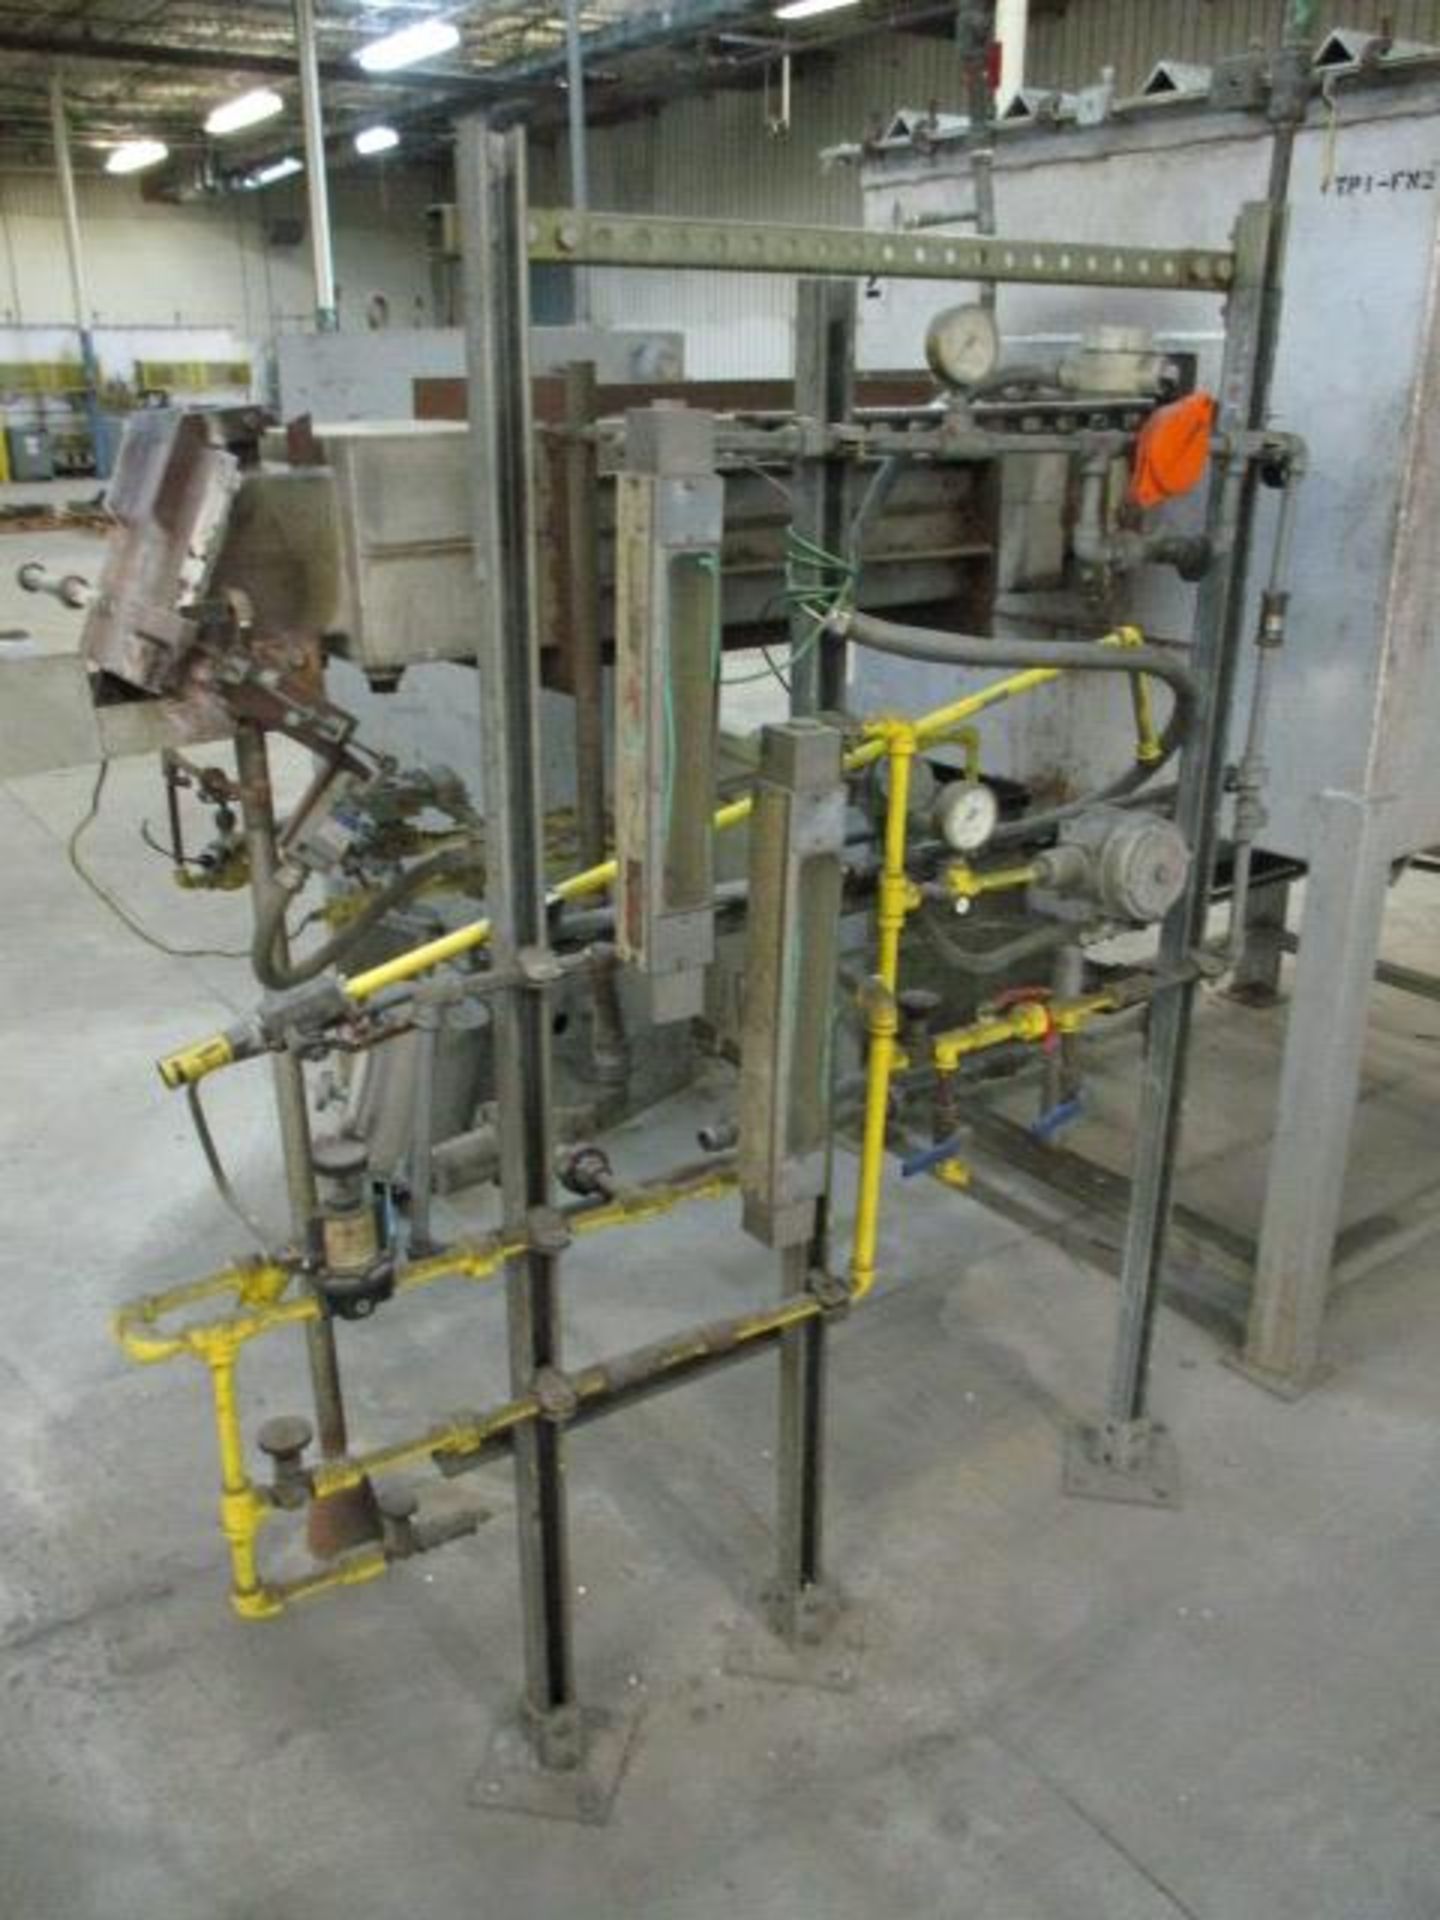 Electric Pusher Furnace with Molybdenum Heating Element, 8" W x 5" H Capacity x Approx 48" Long - Image 7 of 7